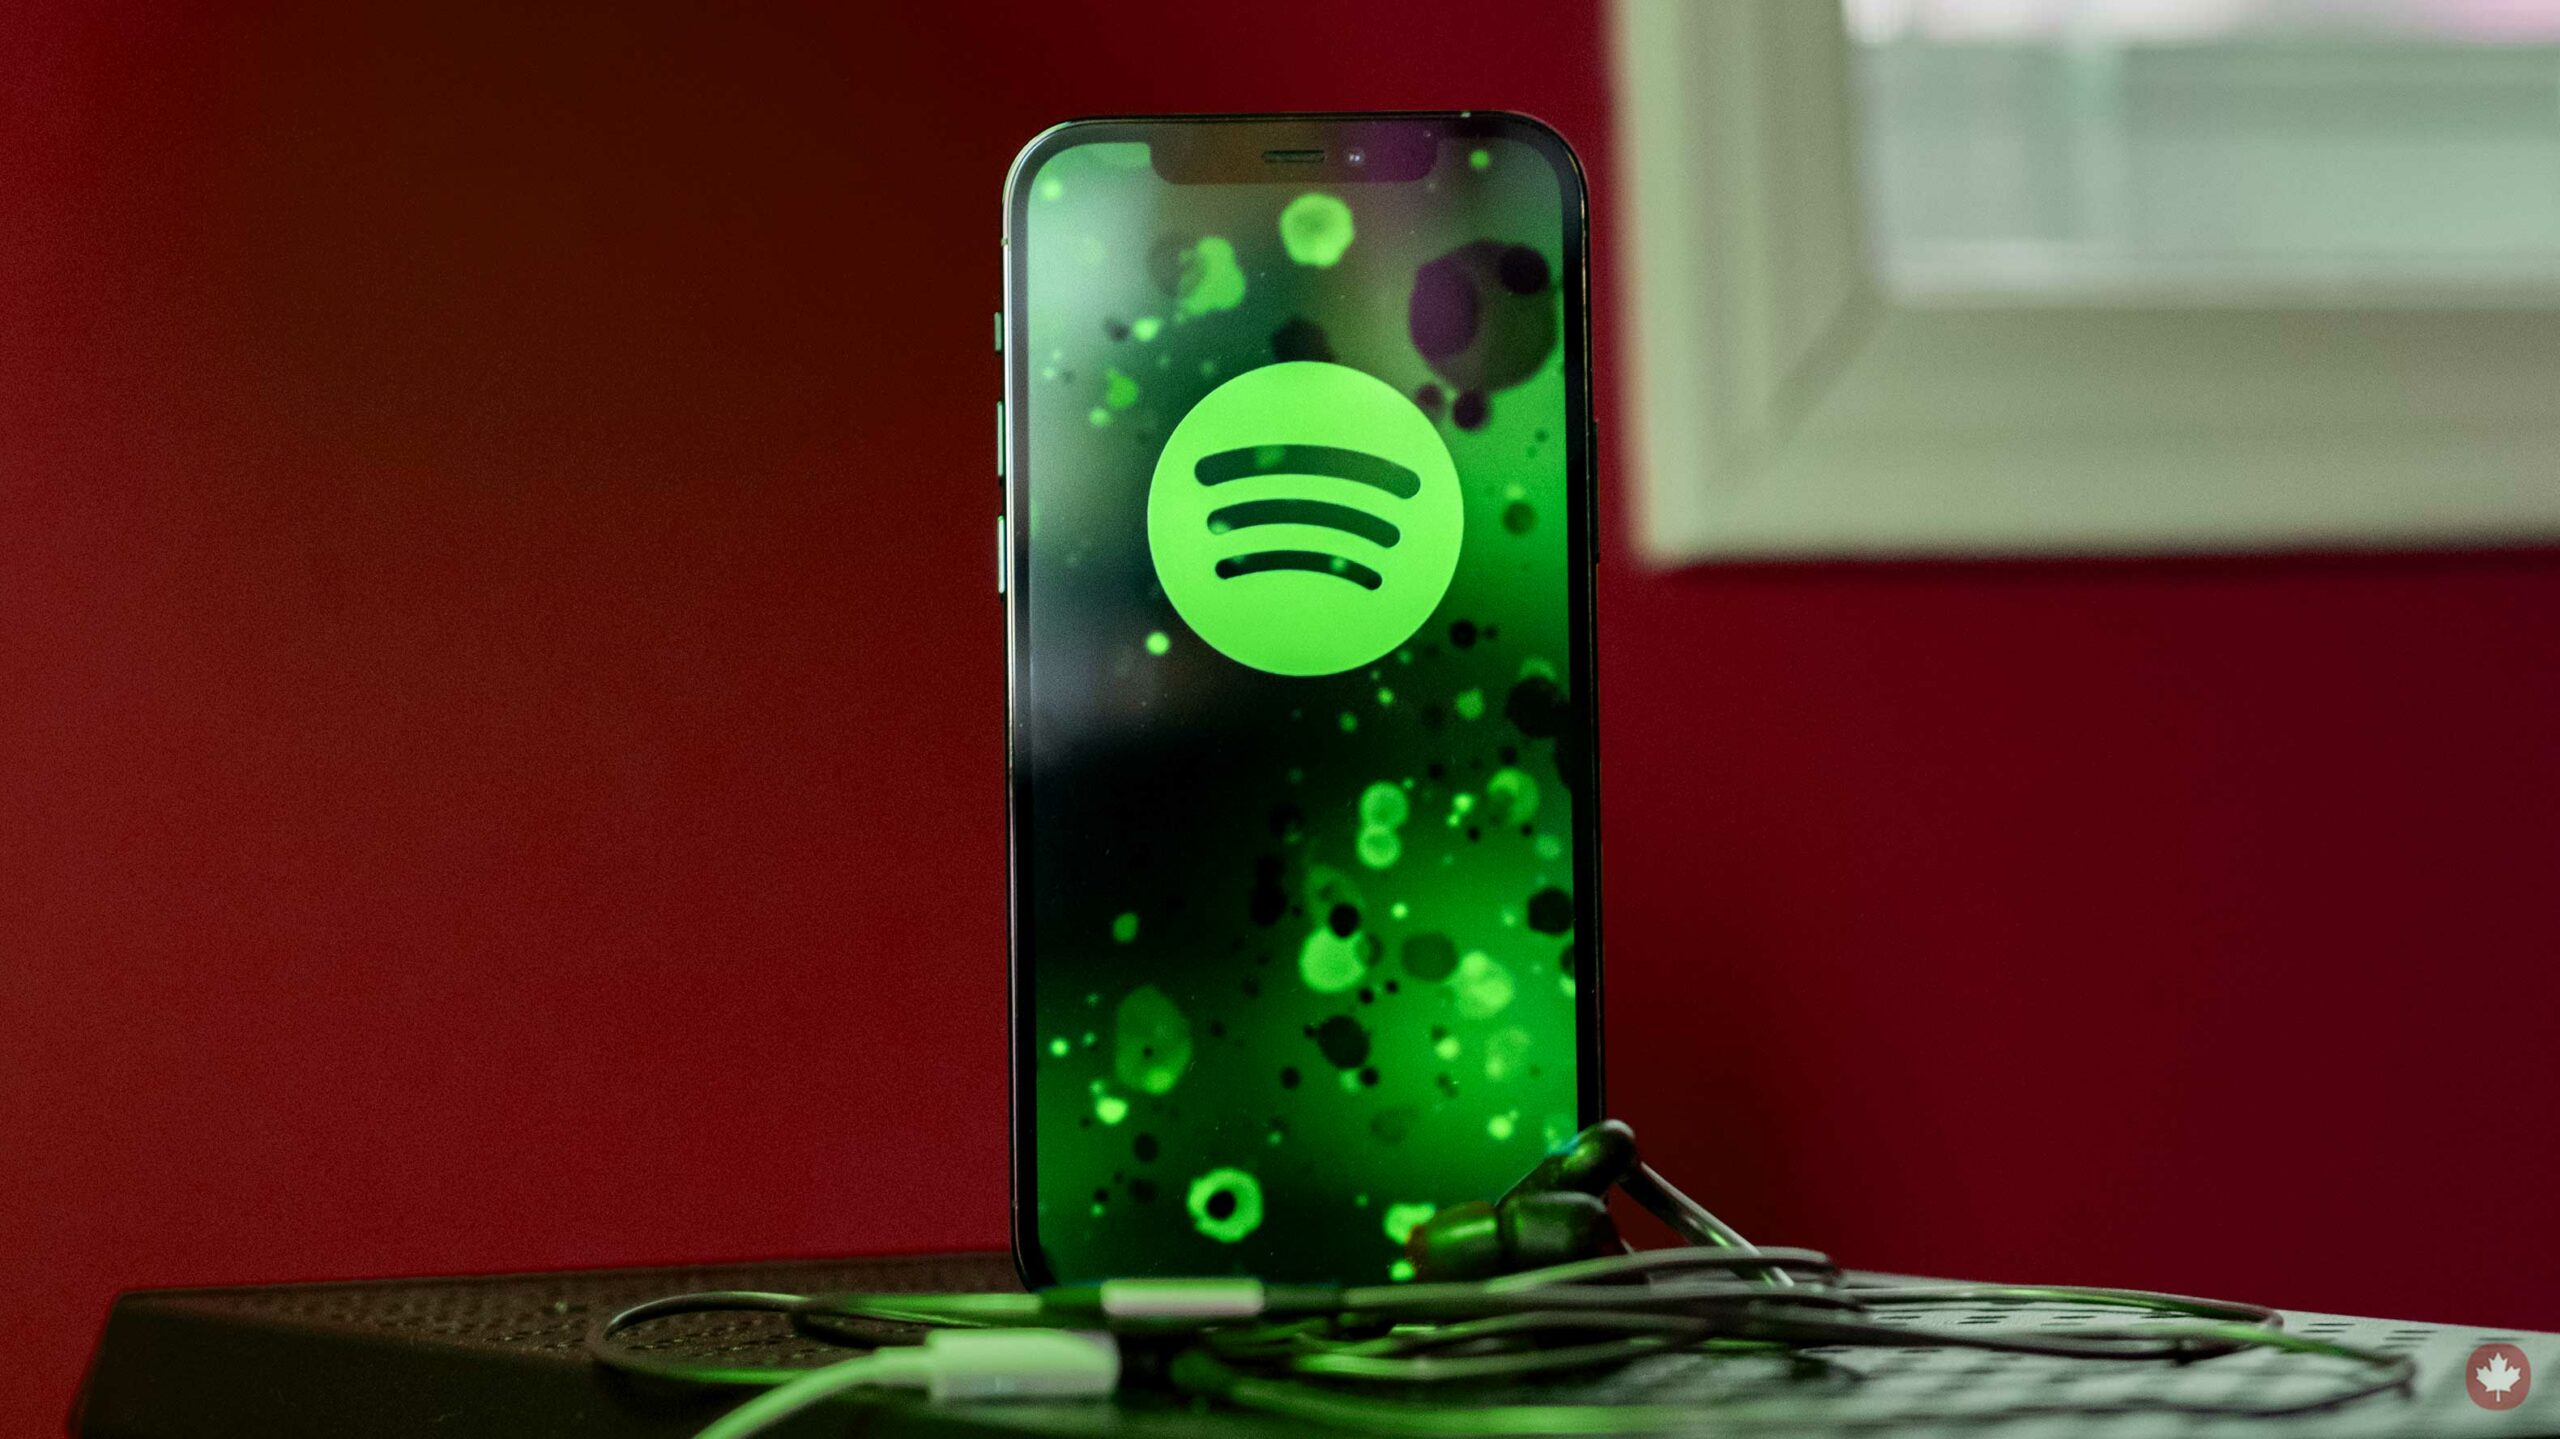 Spotify is increasing its price in Canada to comply with taxes